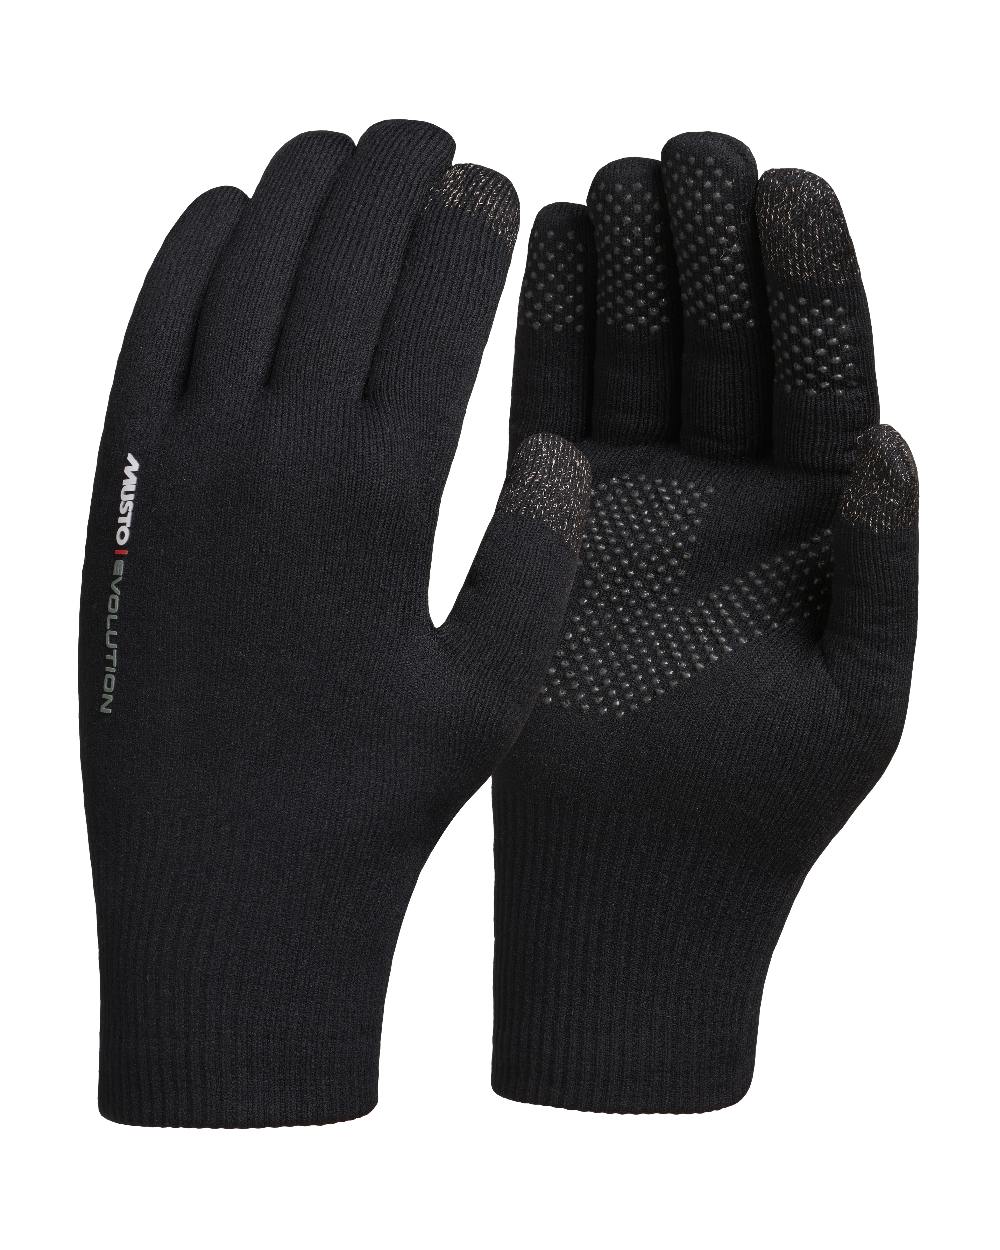 Black Coloured Musto Evolution Waterproof Gloves On A White Background